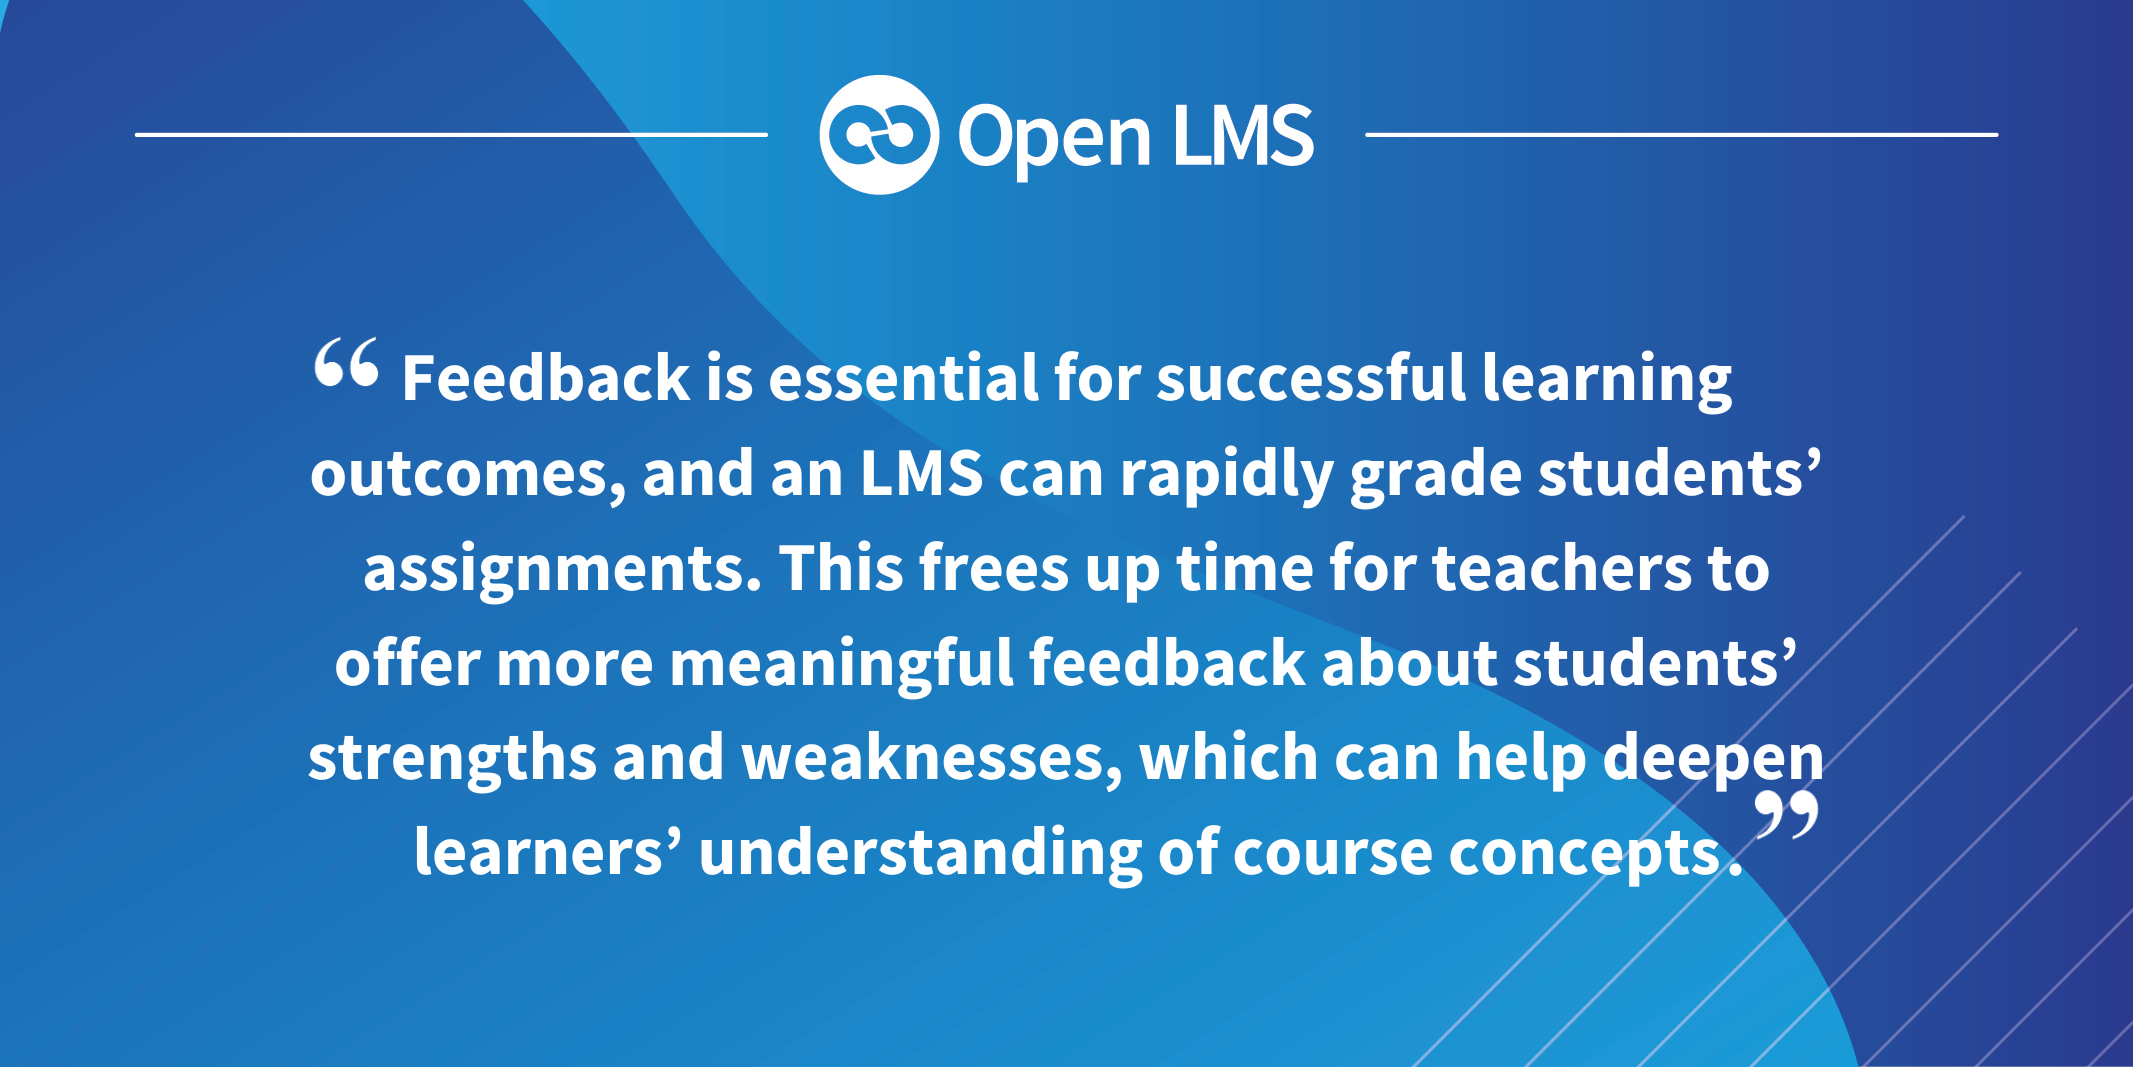 Feedback is essential for successful learning outcomes, and an LMS can rapidly grade students’ assignments. This frees up time for teachers to offer more meaningful feedback about students’ strengths and weaknesses, which can help deepen learners’ understanding of course concepts